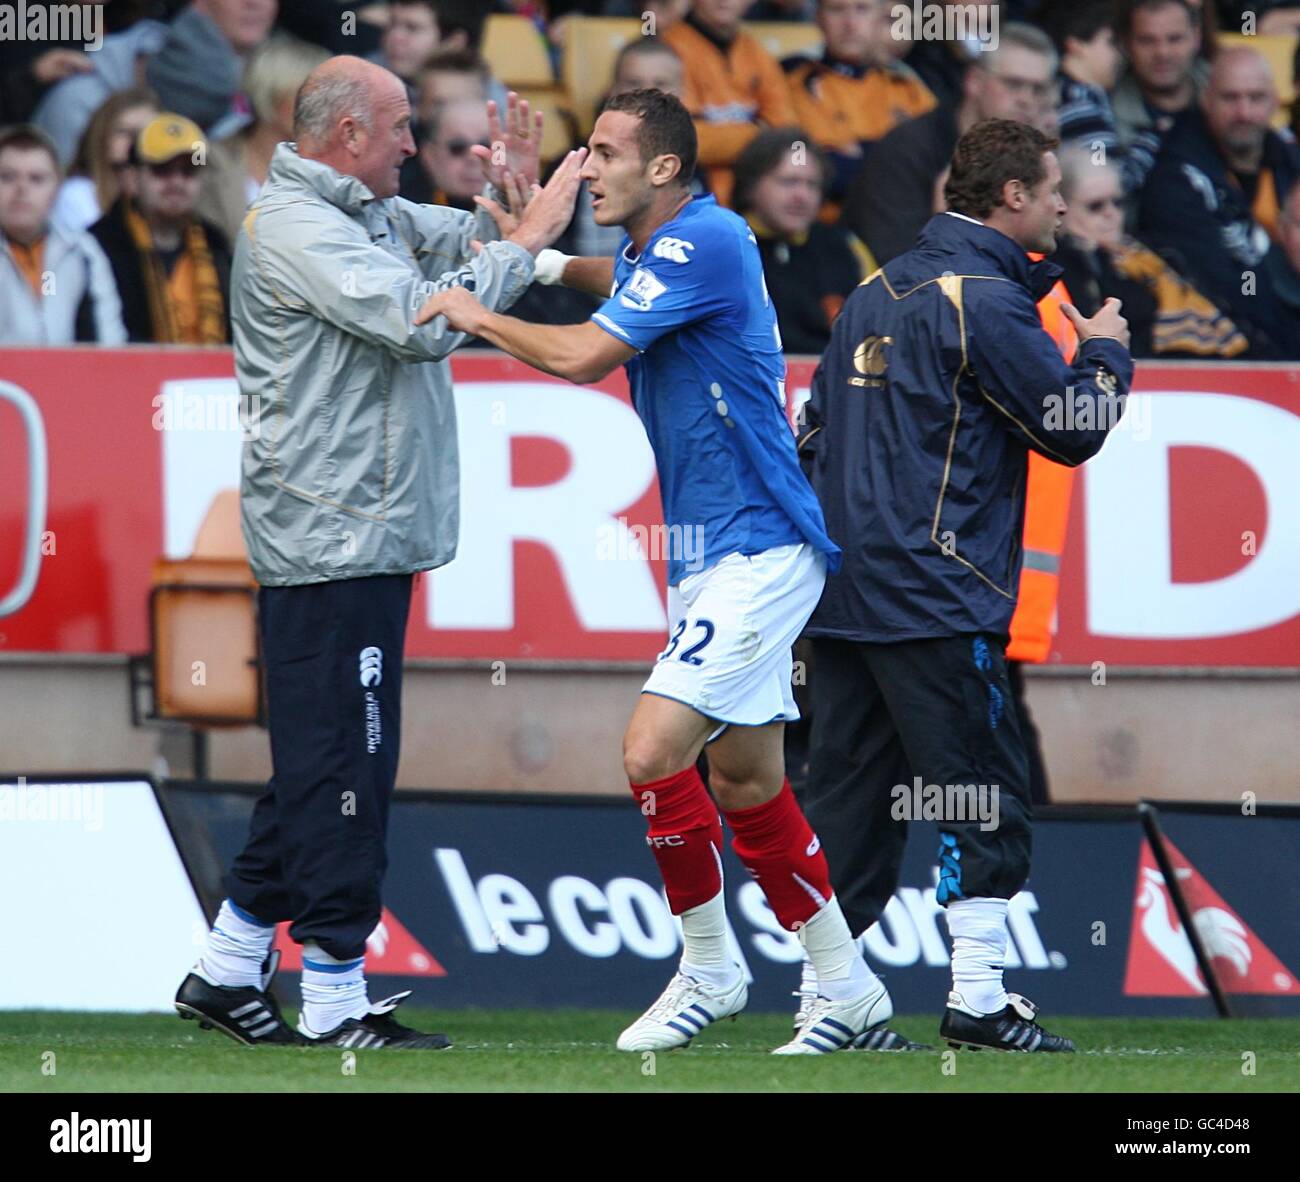 Soccer - Barclays Premier League - Wolverhampton Wanderers v Portsmouth - Molineux. Portsmouth's Hassan Yebda (centre) celebrates scoring the opening goal with manager Paul Hart (left). Stock Photo